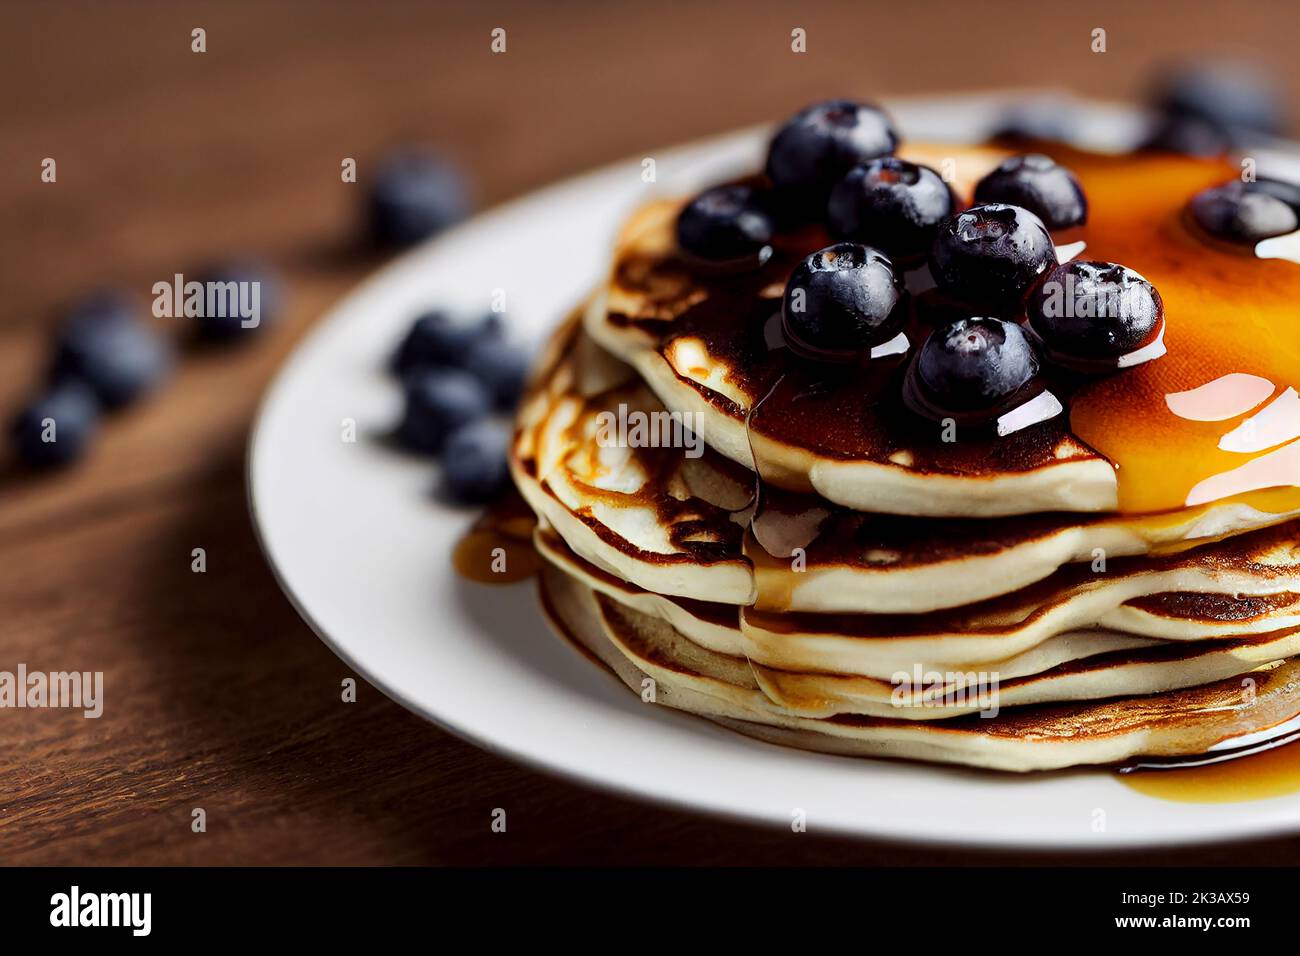 A stack of blueberry pancakes with maple syrup, traditional breakfast or brunch, food photography and illustration Stock Photo